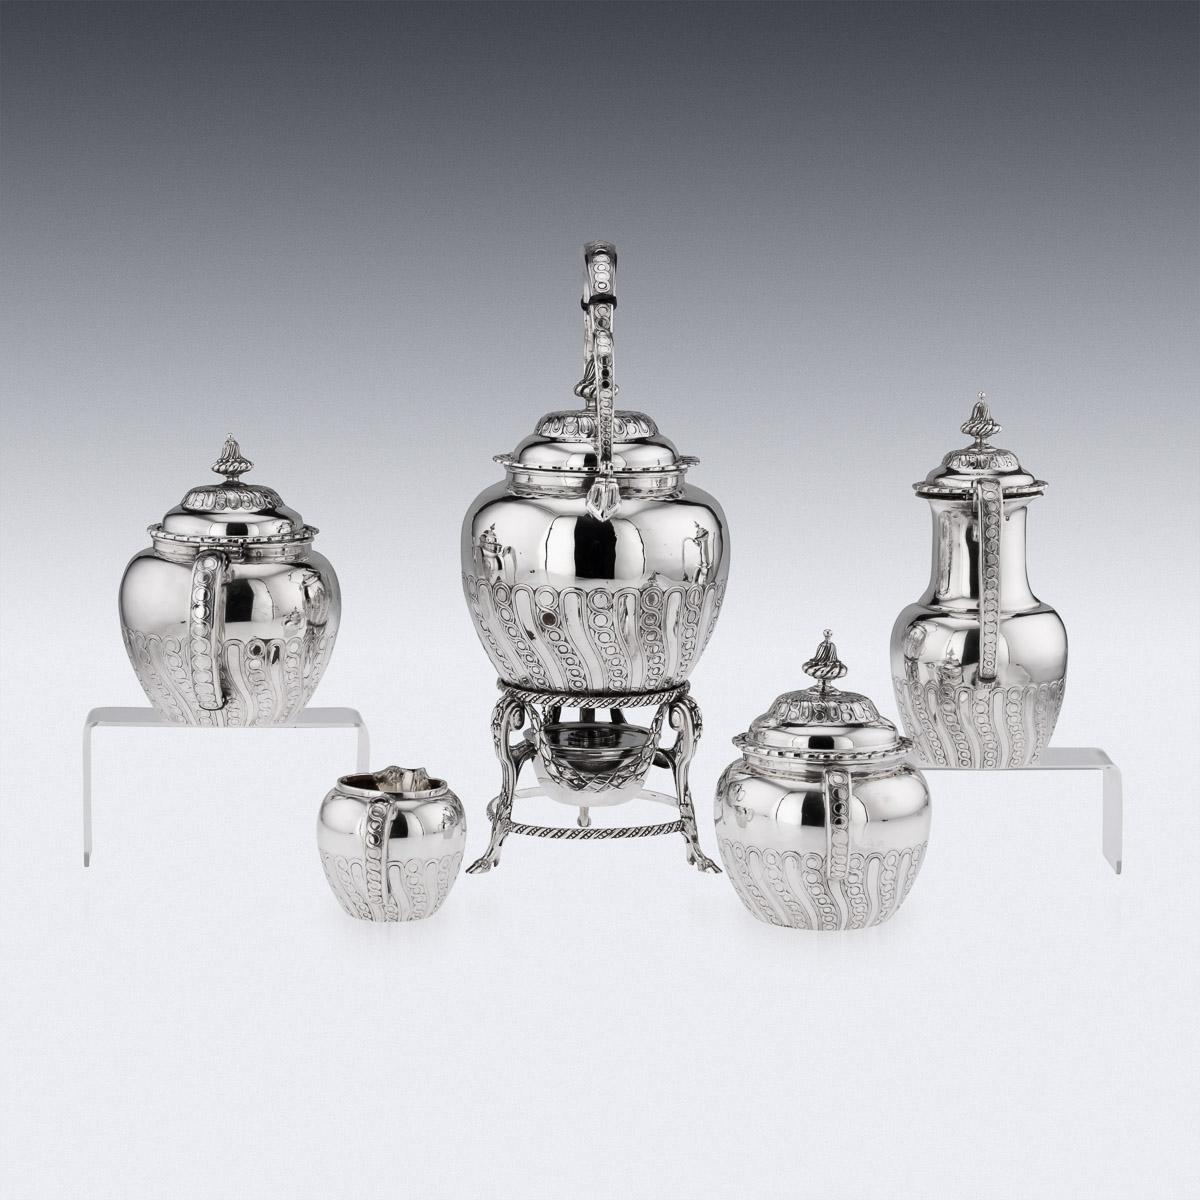 19th Century French cased tea service, comprising: a water kettle, coffee pot, teapot, lidded sugar bowl, silver cream jug, oval dish, a bowl, sugar tongs, toast rack, two egg cups on stands and a double salt with a spoon.
Hallmarked French silver,